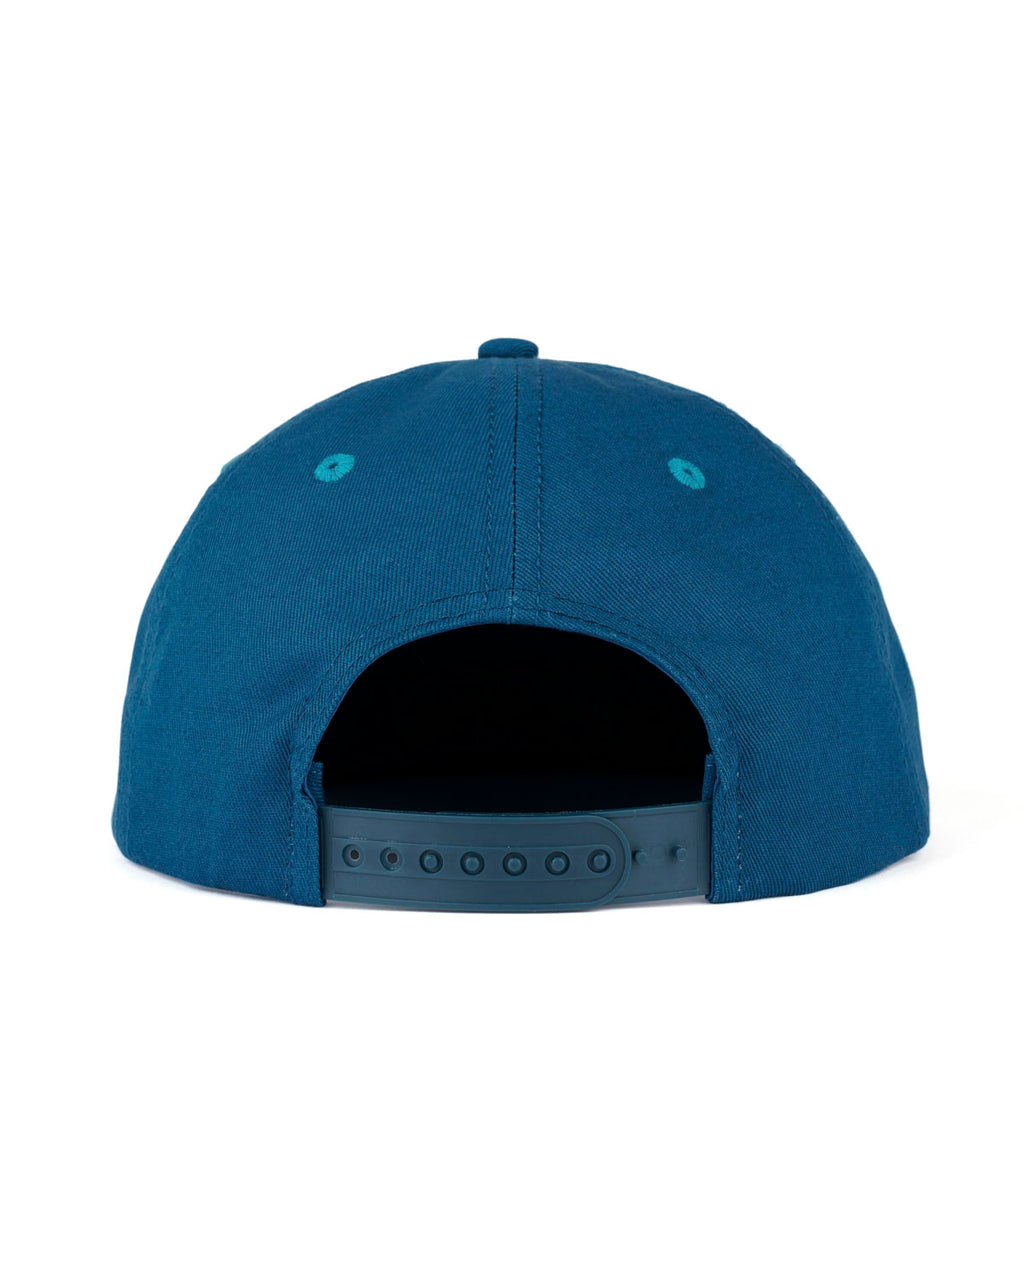 Afterlife 6 Panel Cap - Navy 2